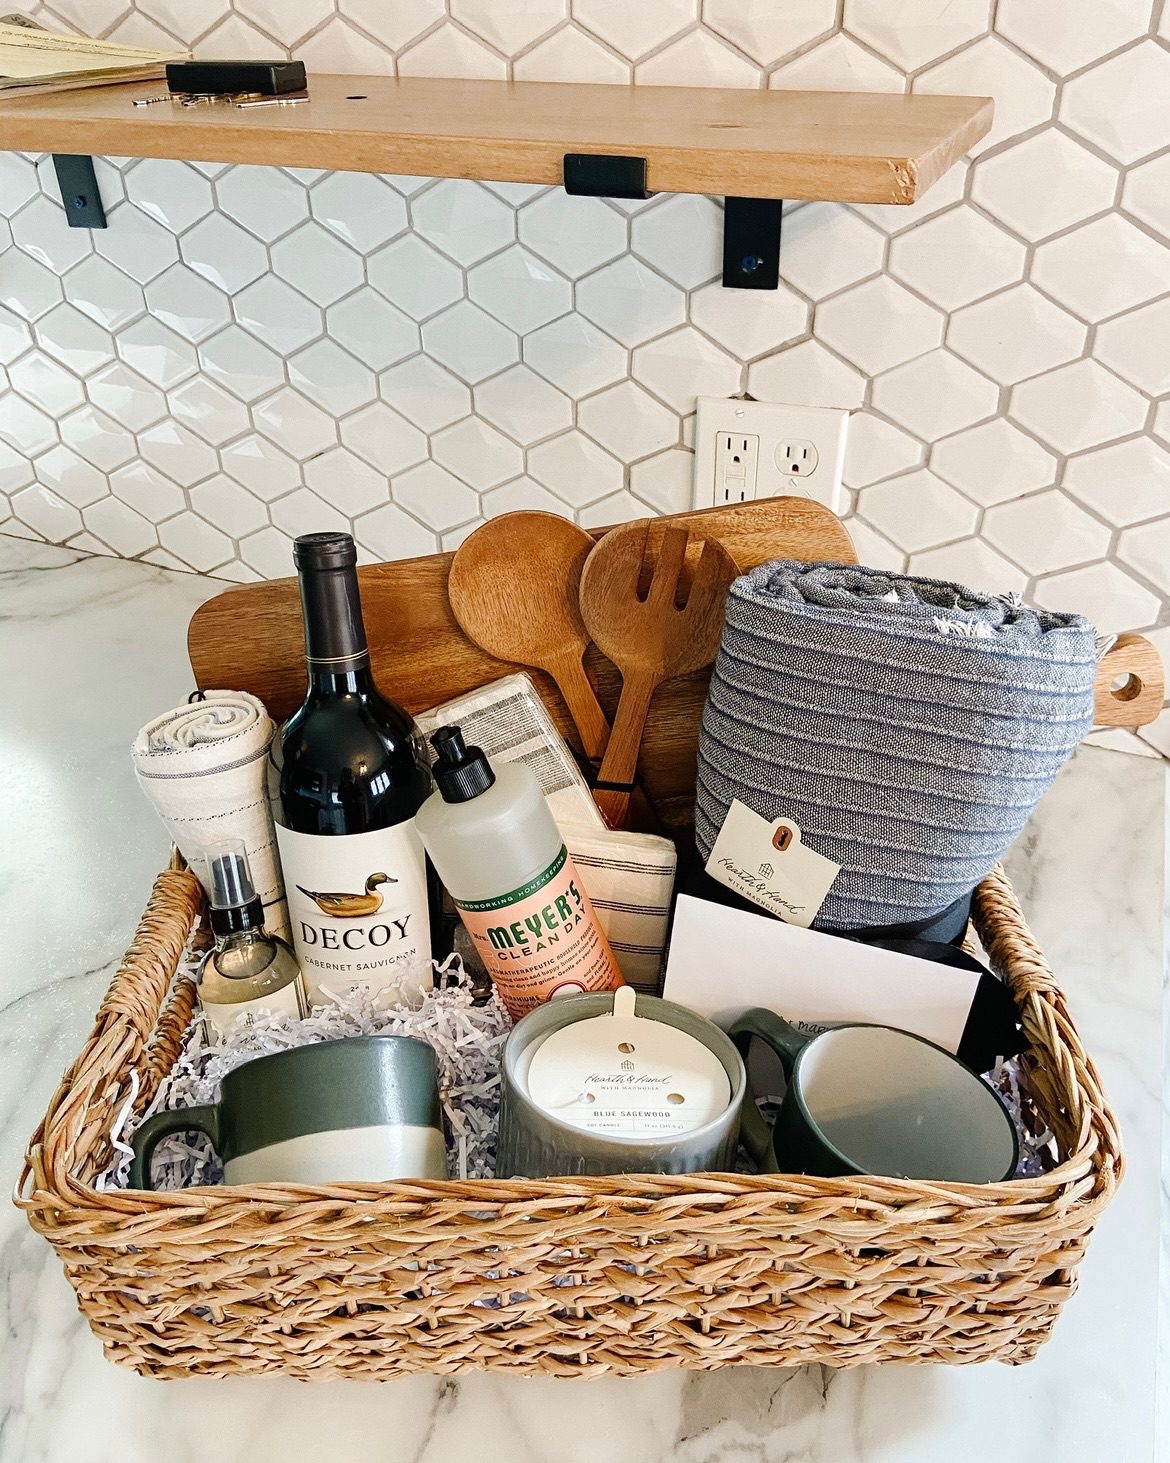 a basket with gifts an dlocal products in it to be a housewarming gift